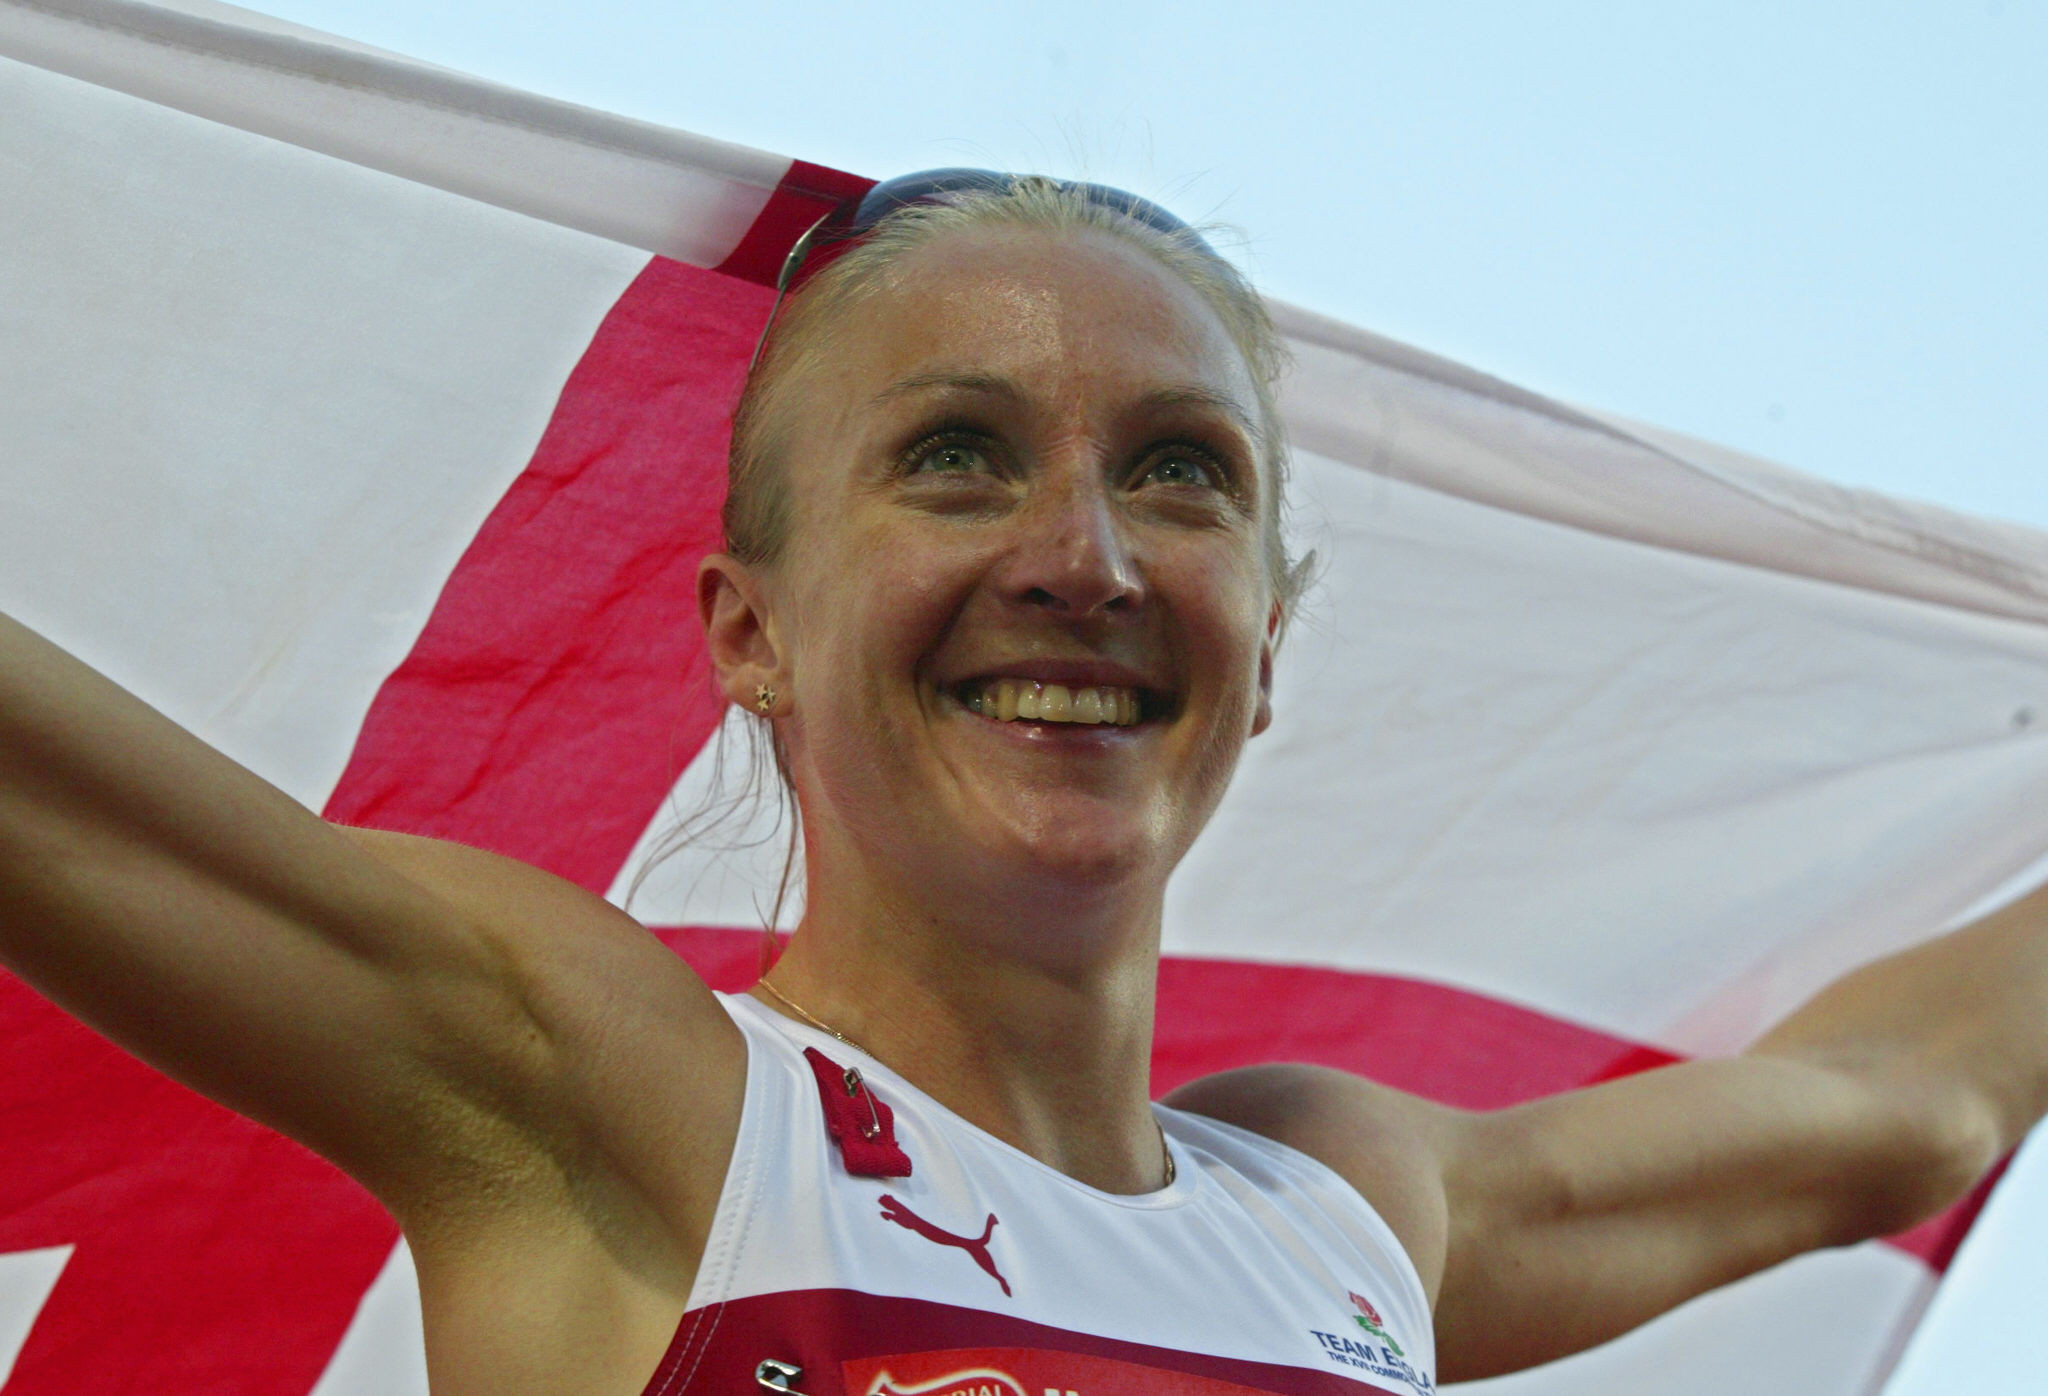 Paula Radcliffe won a memorable home gold for England in the 5,000m at Manchester 2002 ©Getty Images